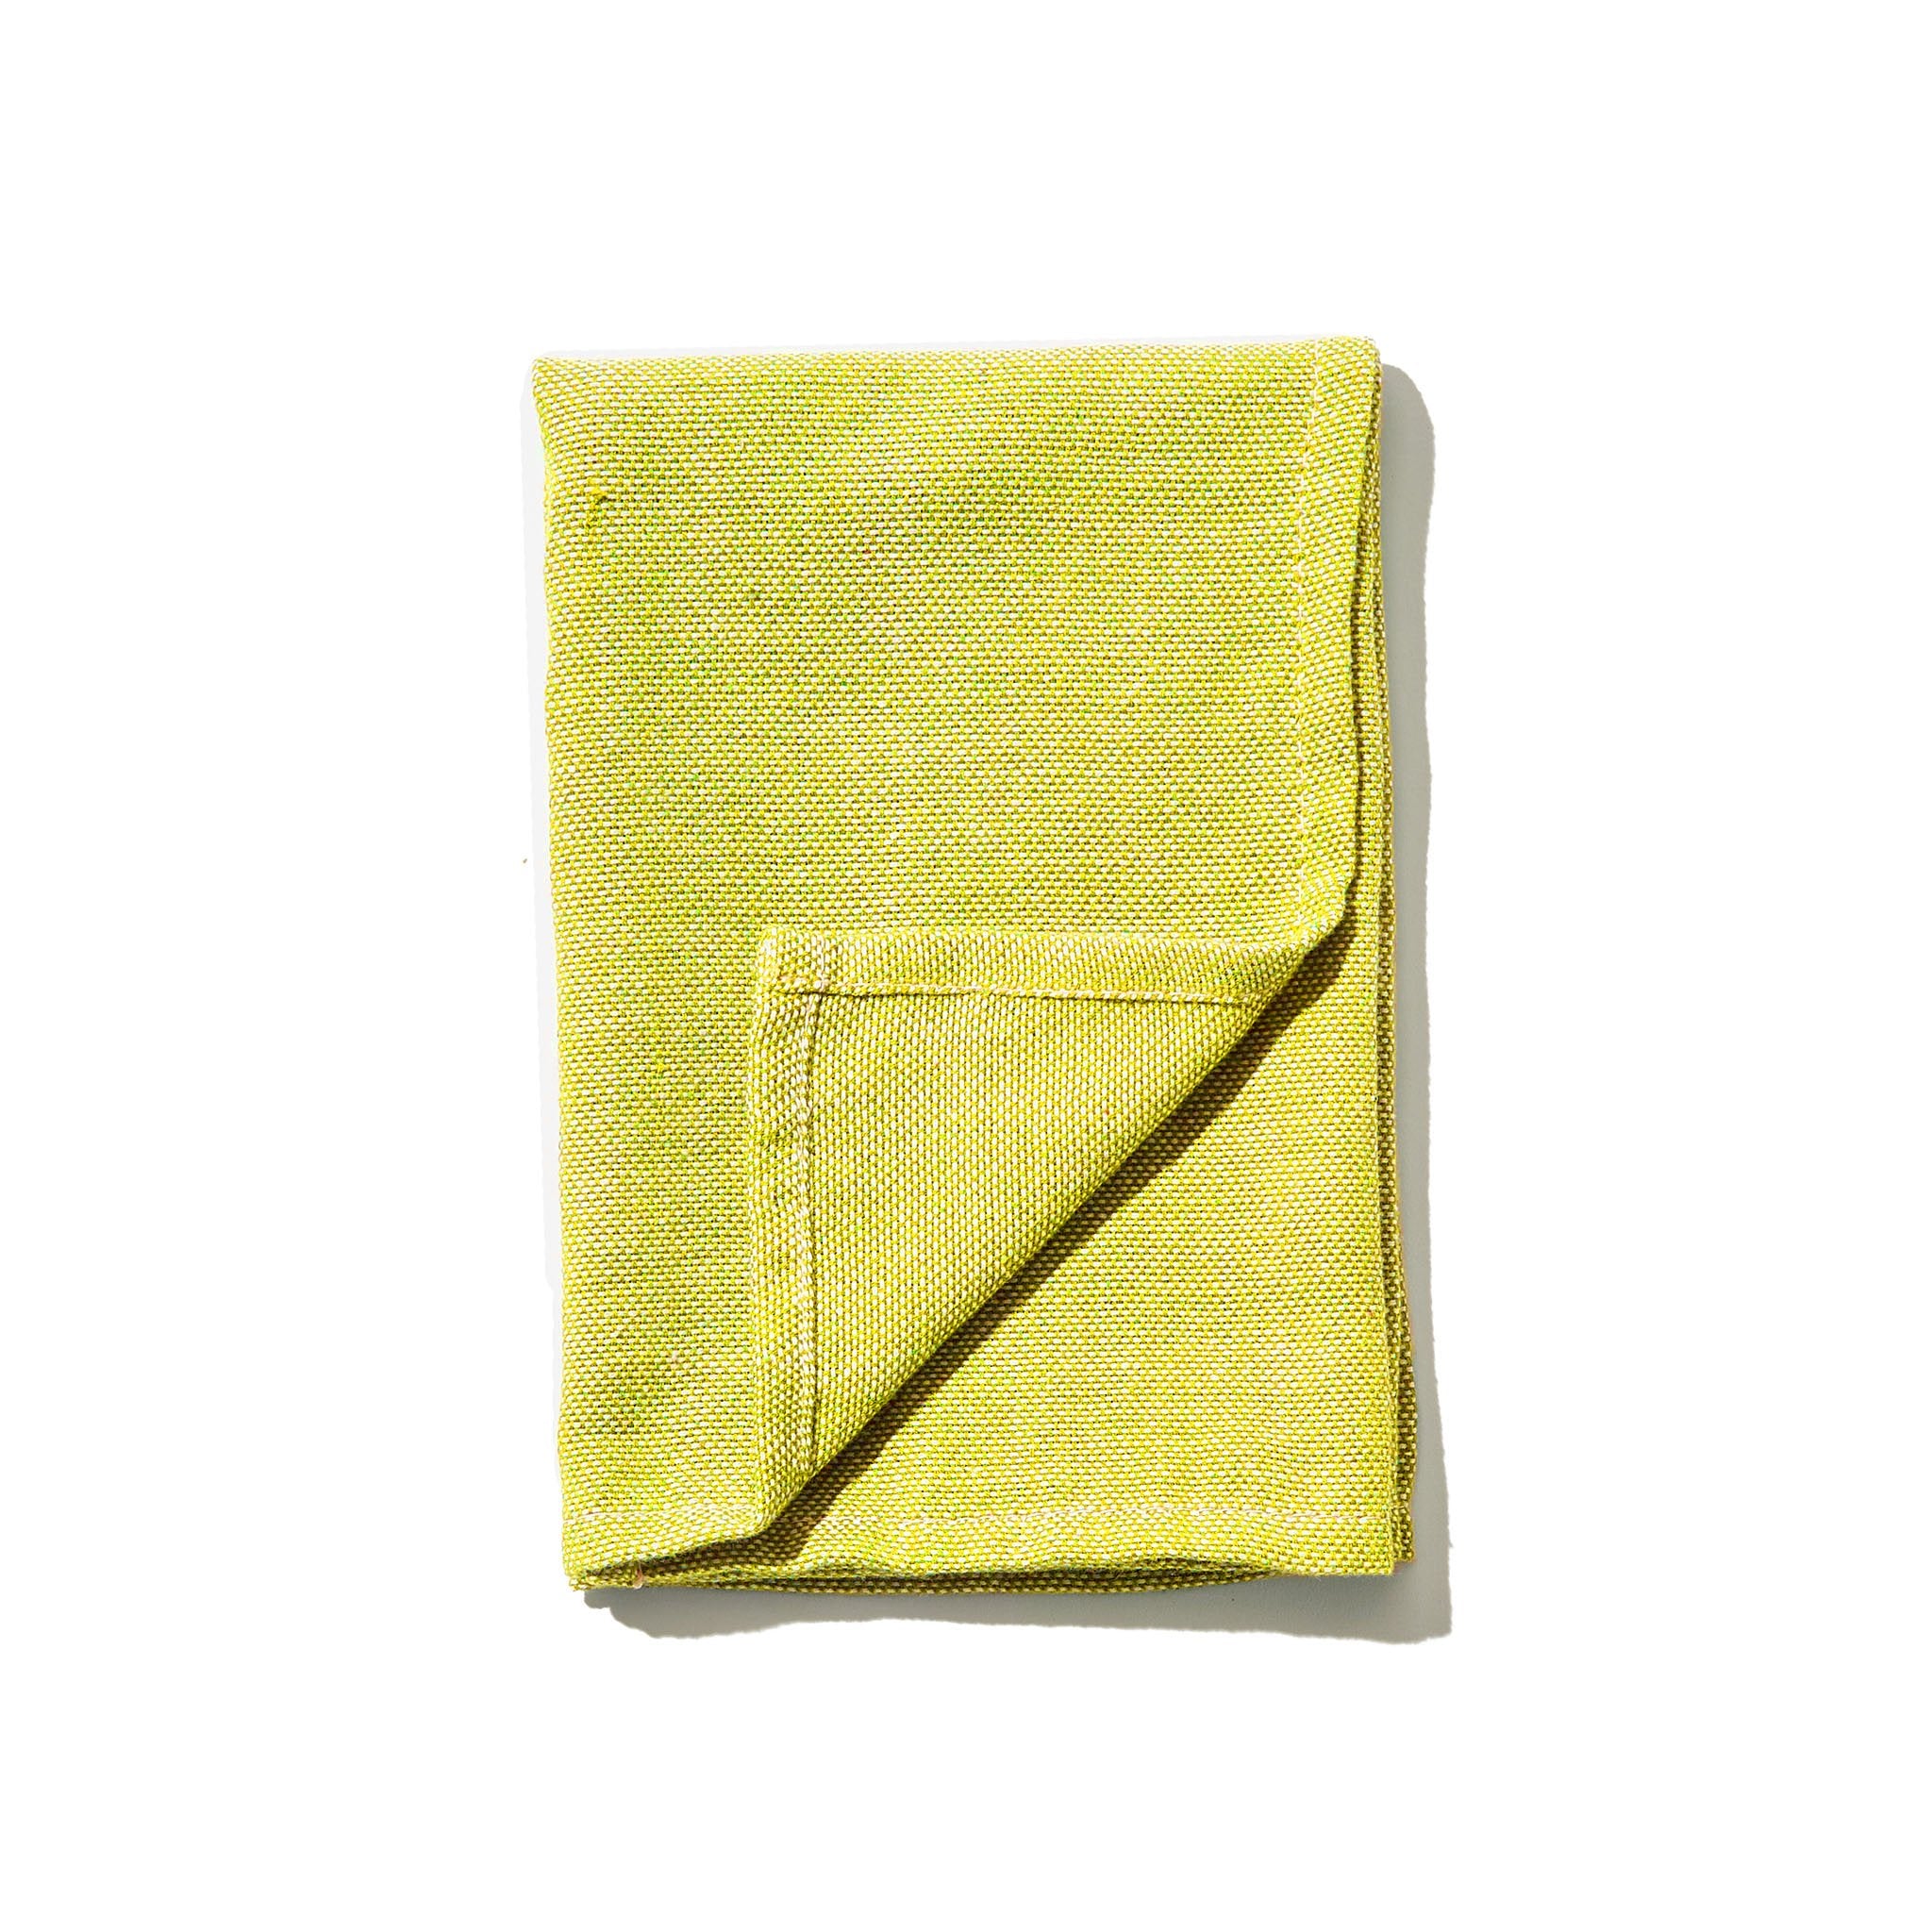 Update your table with this yellow napkin, hand-woven from 100% Ethiopian cotton and dyed in small batches.